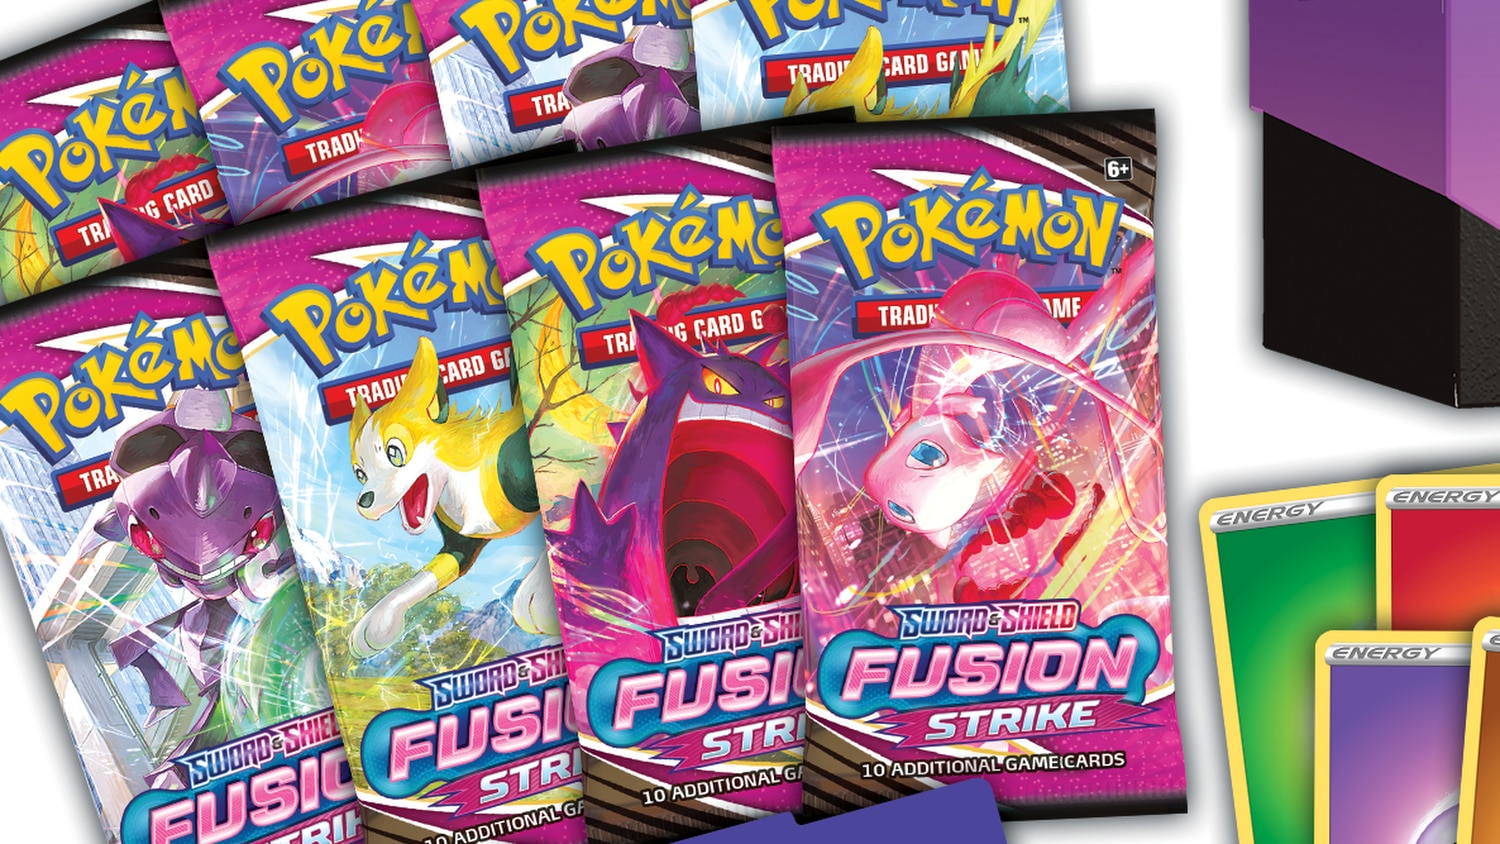 Pokémon Trading Card Game Adds New Fusion Strike Style Mechanic In ...